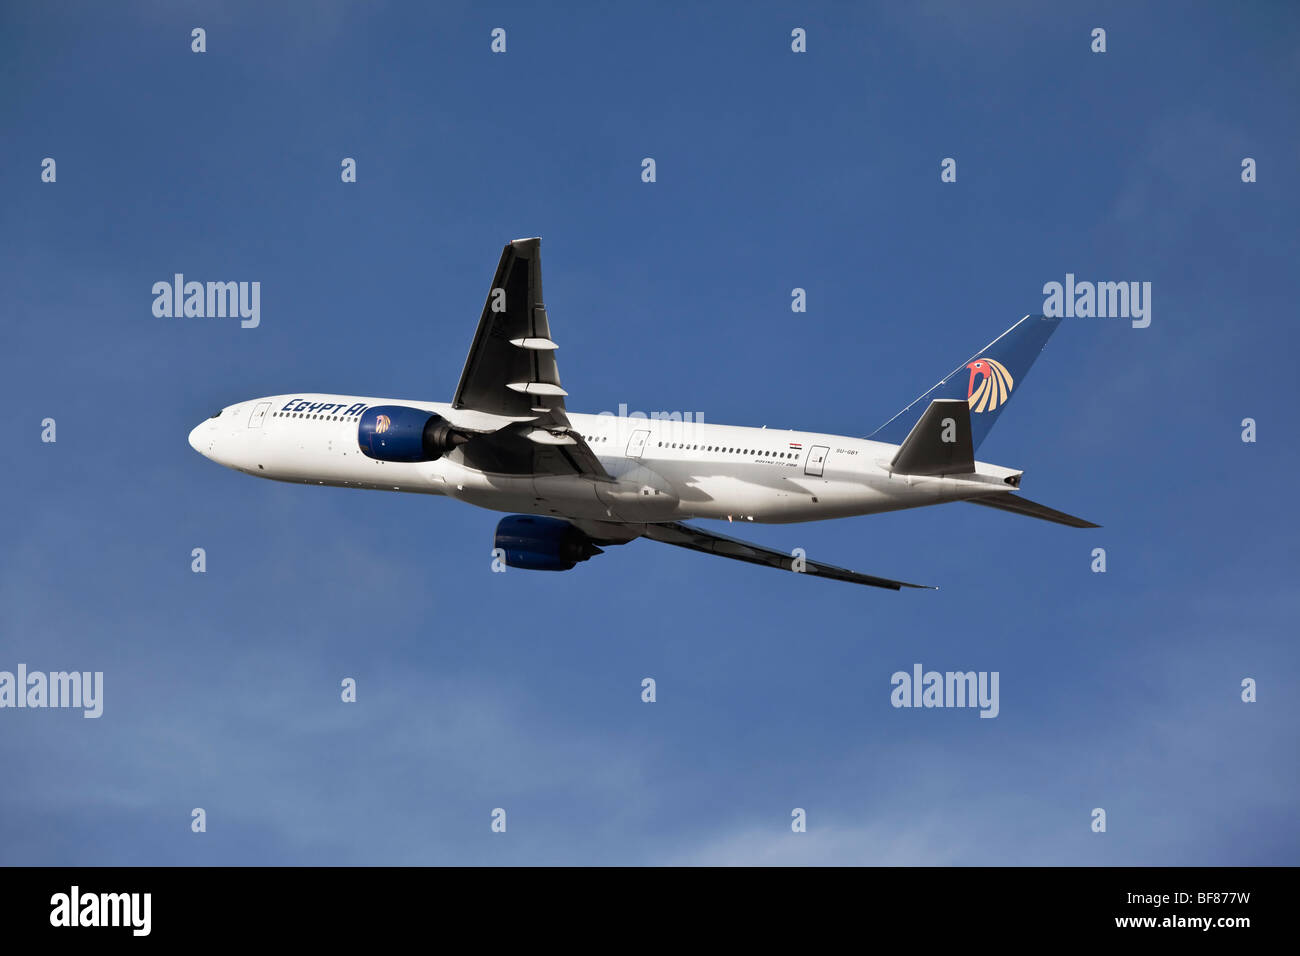 A Boeing 777 of the Egyptian airline Egyptair on departure Stock Photo